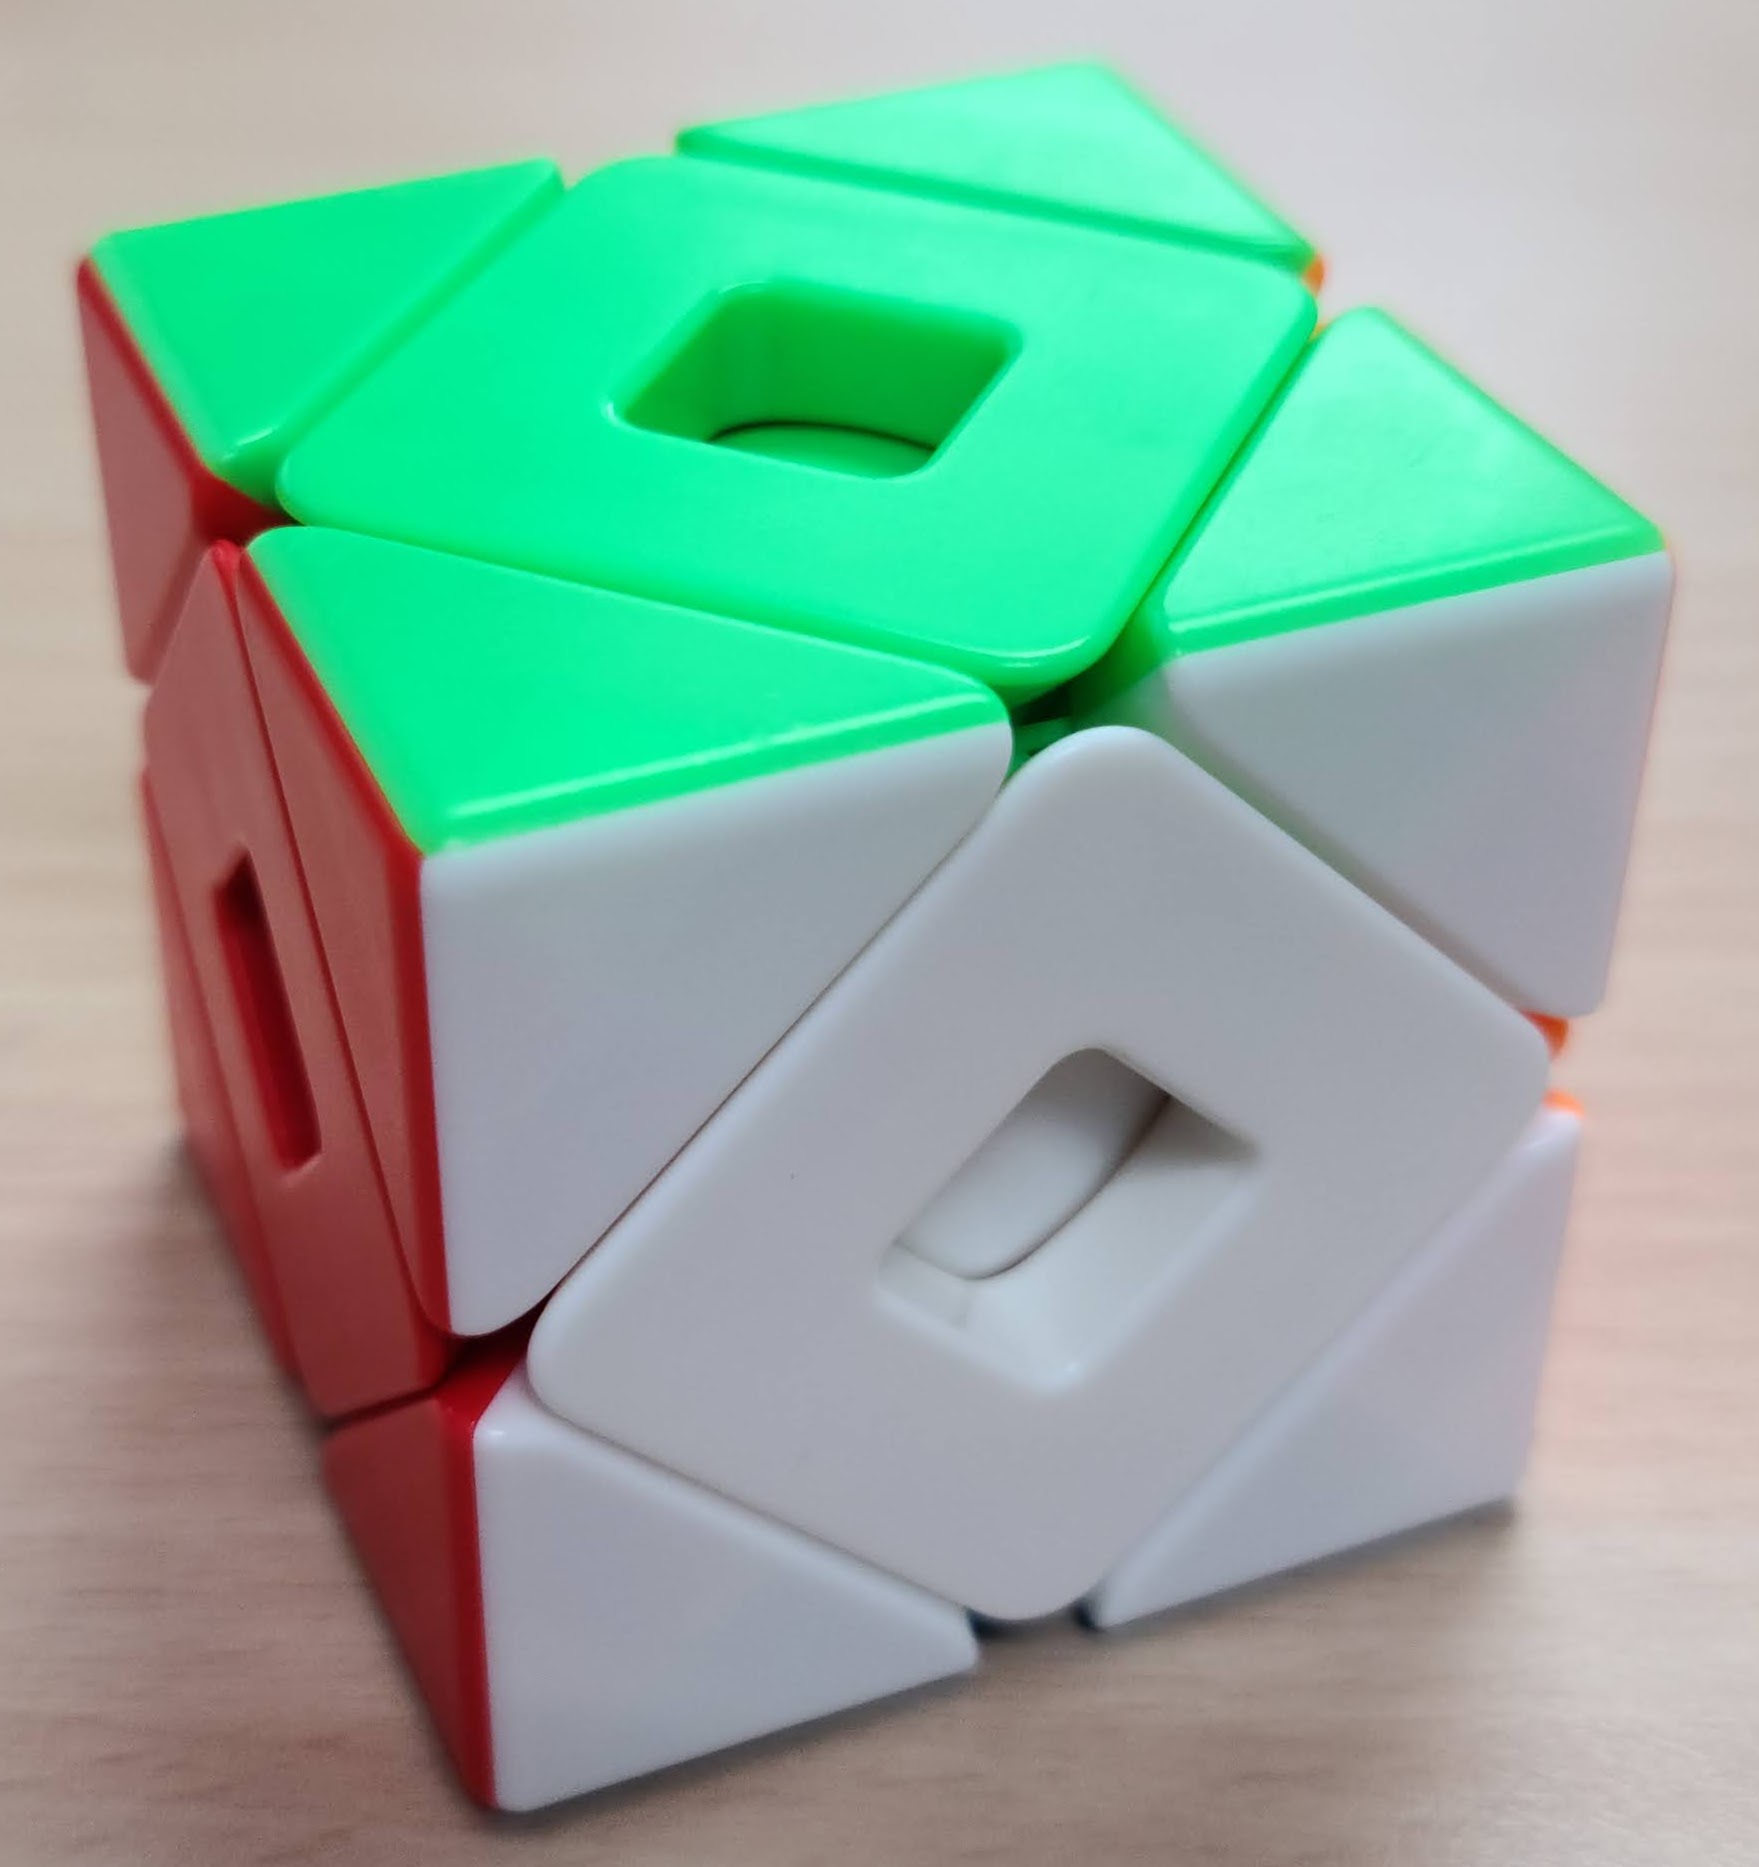 Read more about the article 魔域雙重斜轉魔方(Double Skewb)